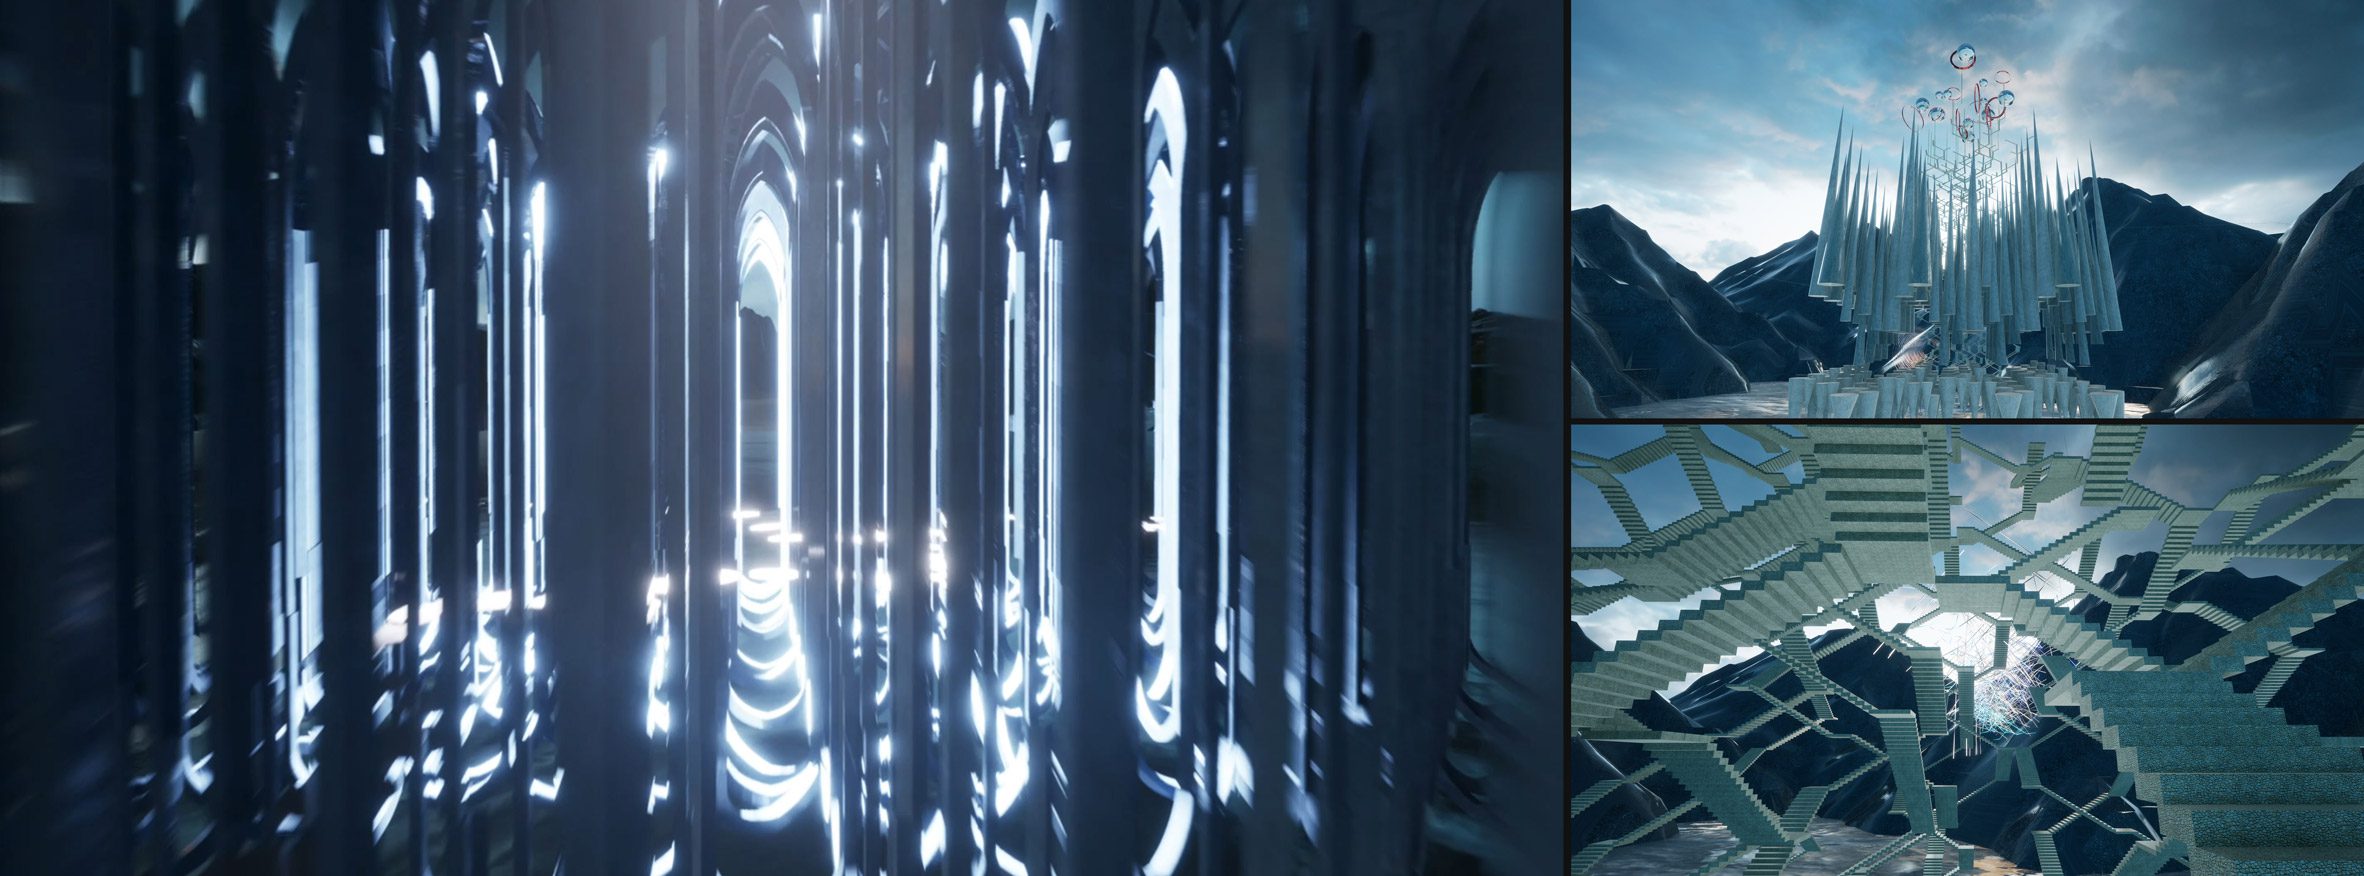 Stills from a video game with blue staircases and spikes